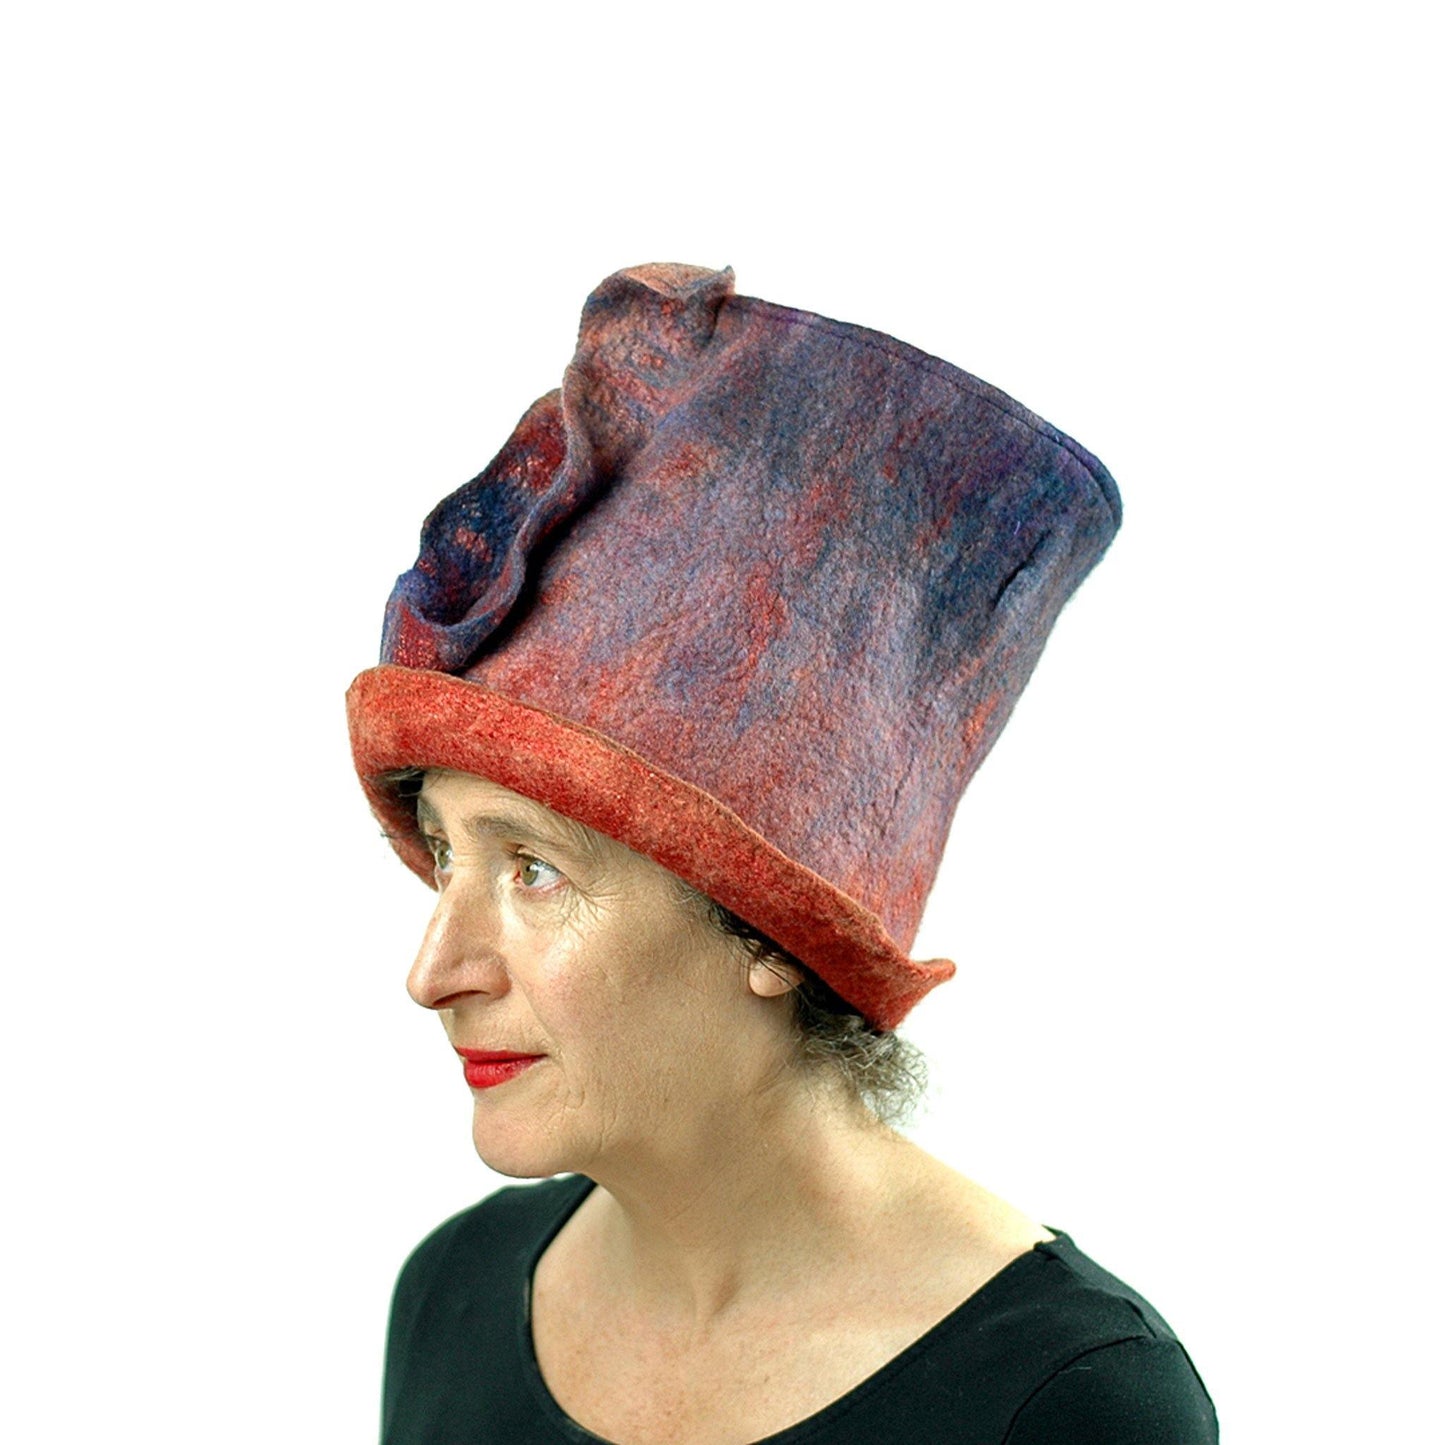 Purple and Orange Felted Top Hat Inspired by Monet Painting - other side view